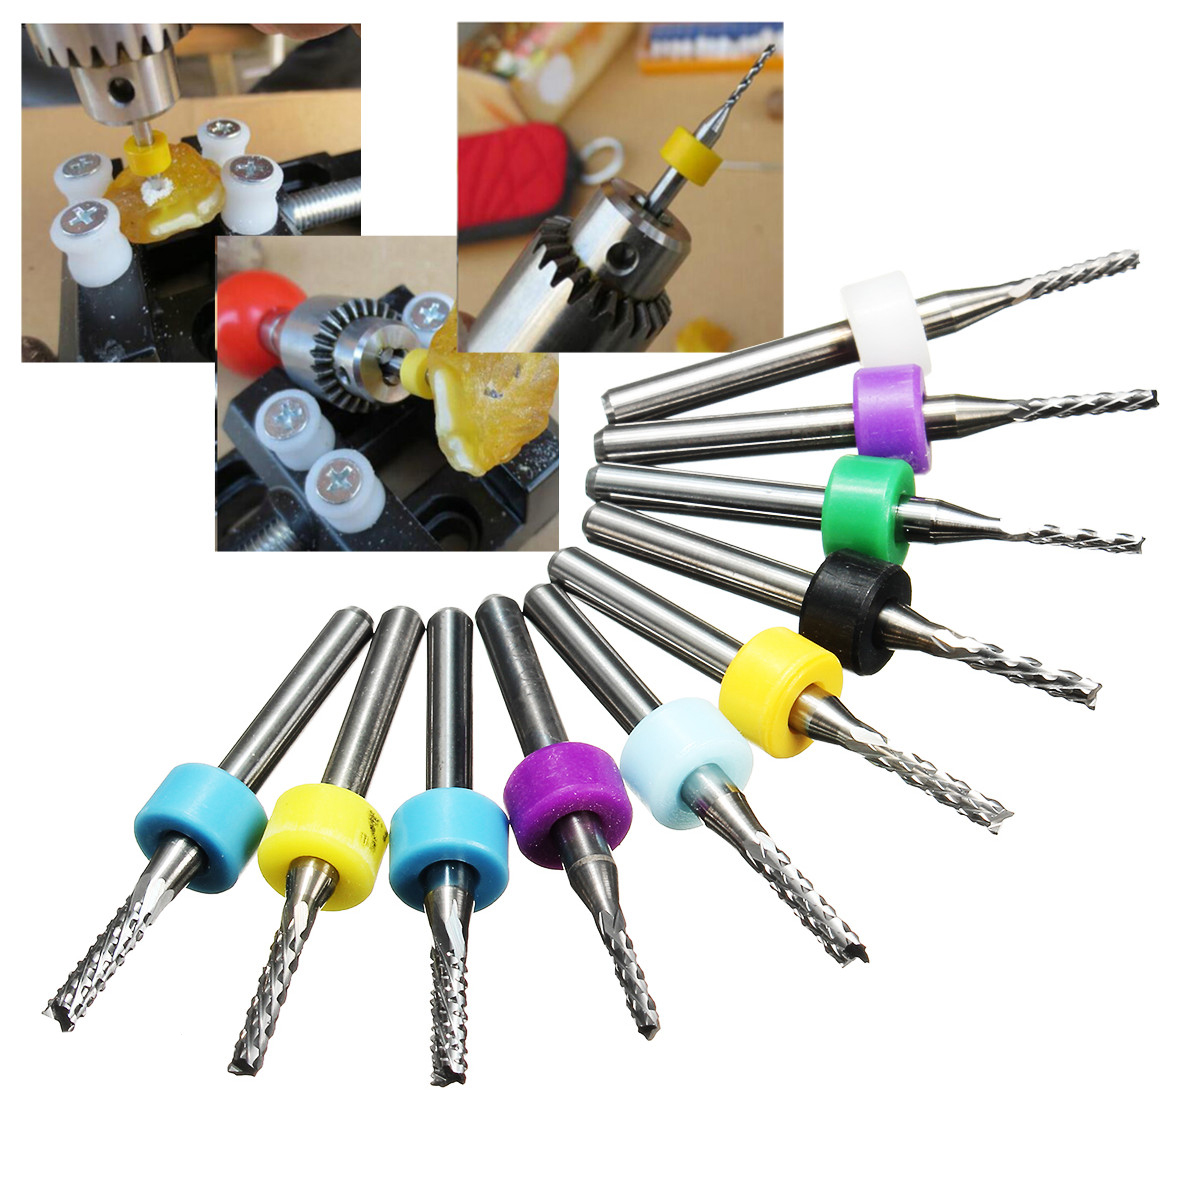 

10pcs Tungsten Carbide PCB Drill Bit Set CNC End Mill Engraving Bits for Circuit Boards